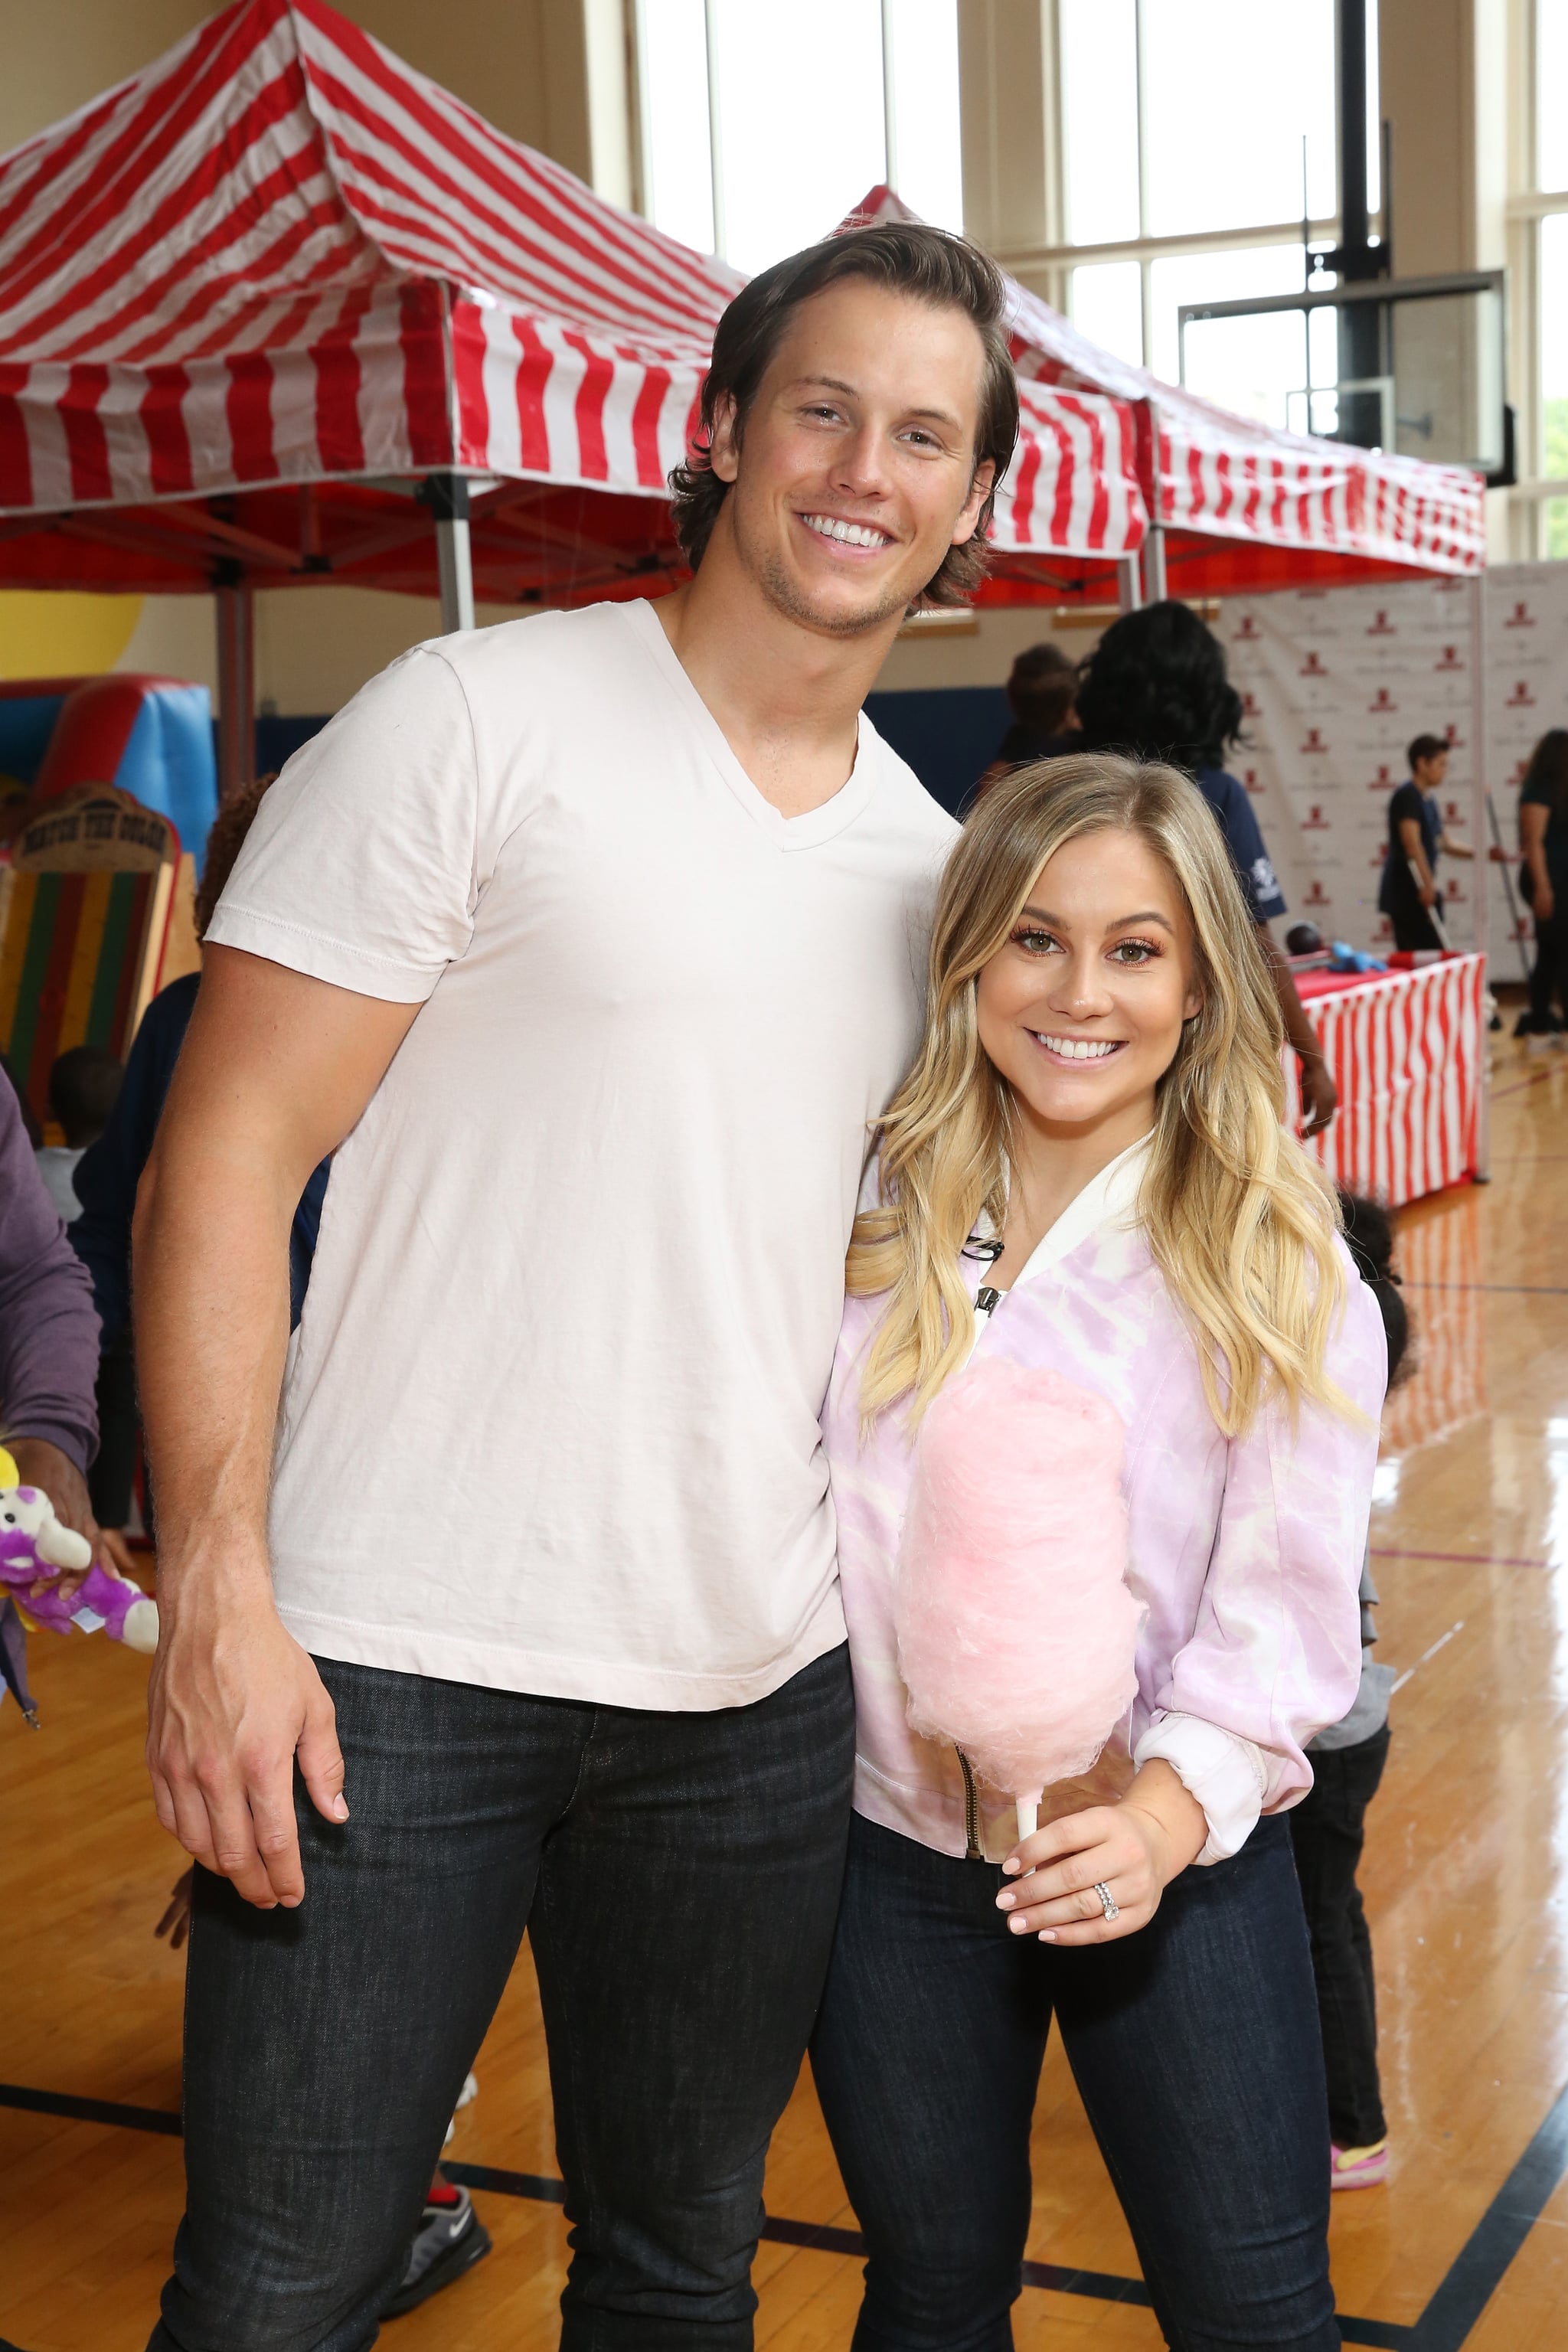 CHICAGO, IL - AUGUST 15:  Andrew East and Shawn Johnson attend as Vera Bradley partners with Blessings In A Backpack to kick-off back-to-school philanthropy tour at St. Vincent De Paul Center on August 15, 2018 in Chicago, Illinois.  (Photo by Robin Marchant/Getty Images for Vera Bradley)